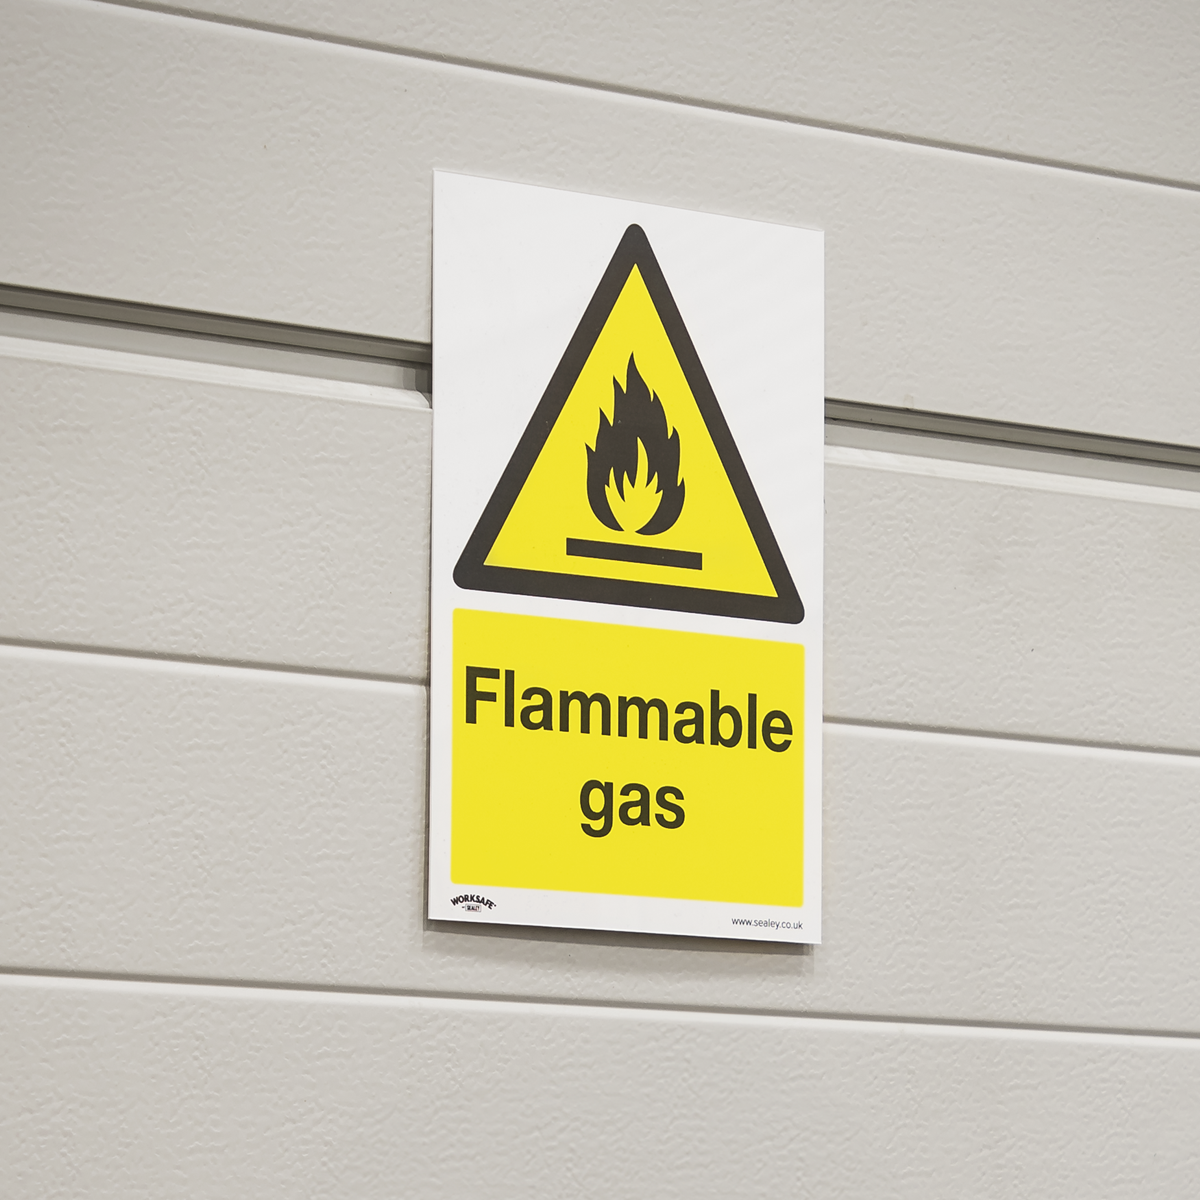 Warning Safety Sign - Flammable Gas - Rigid Plastic - Pack of 10